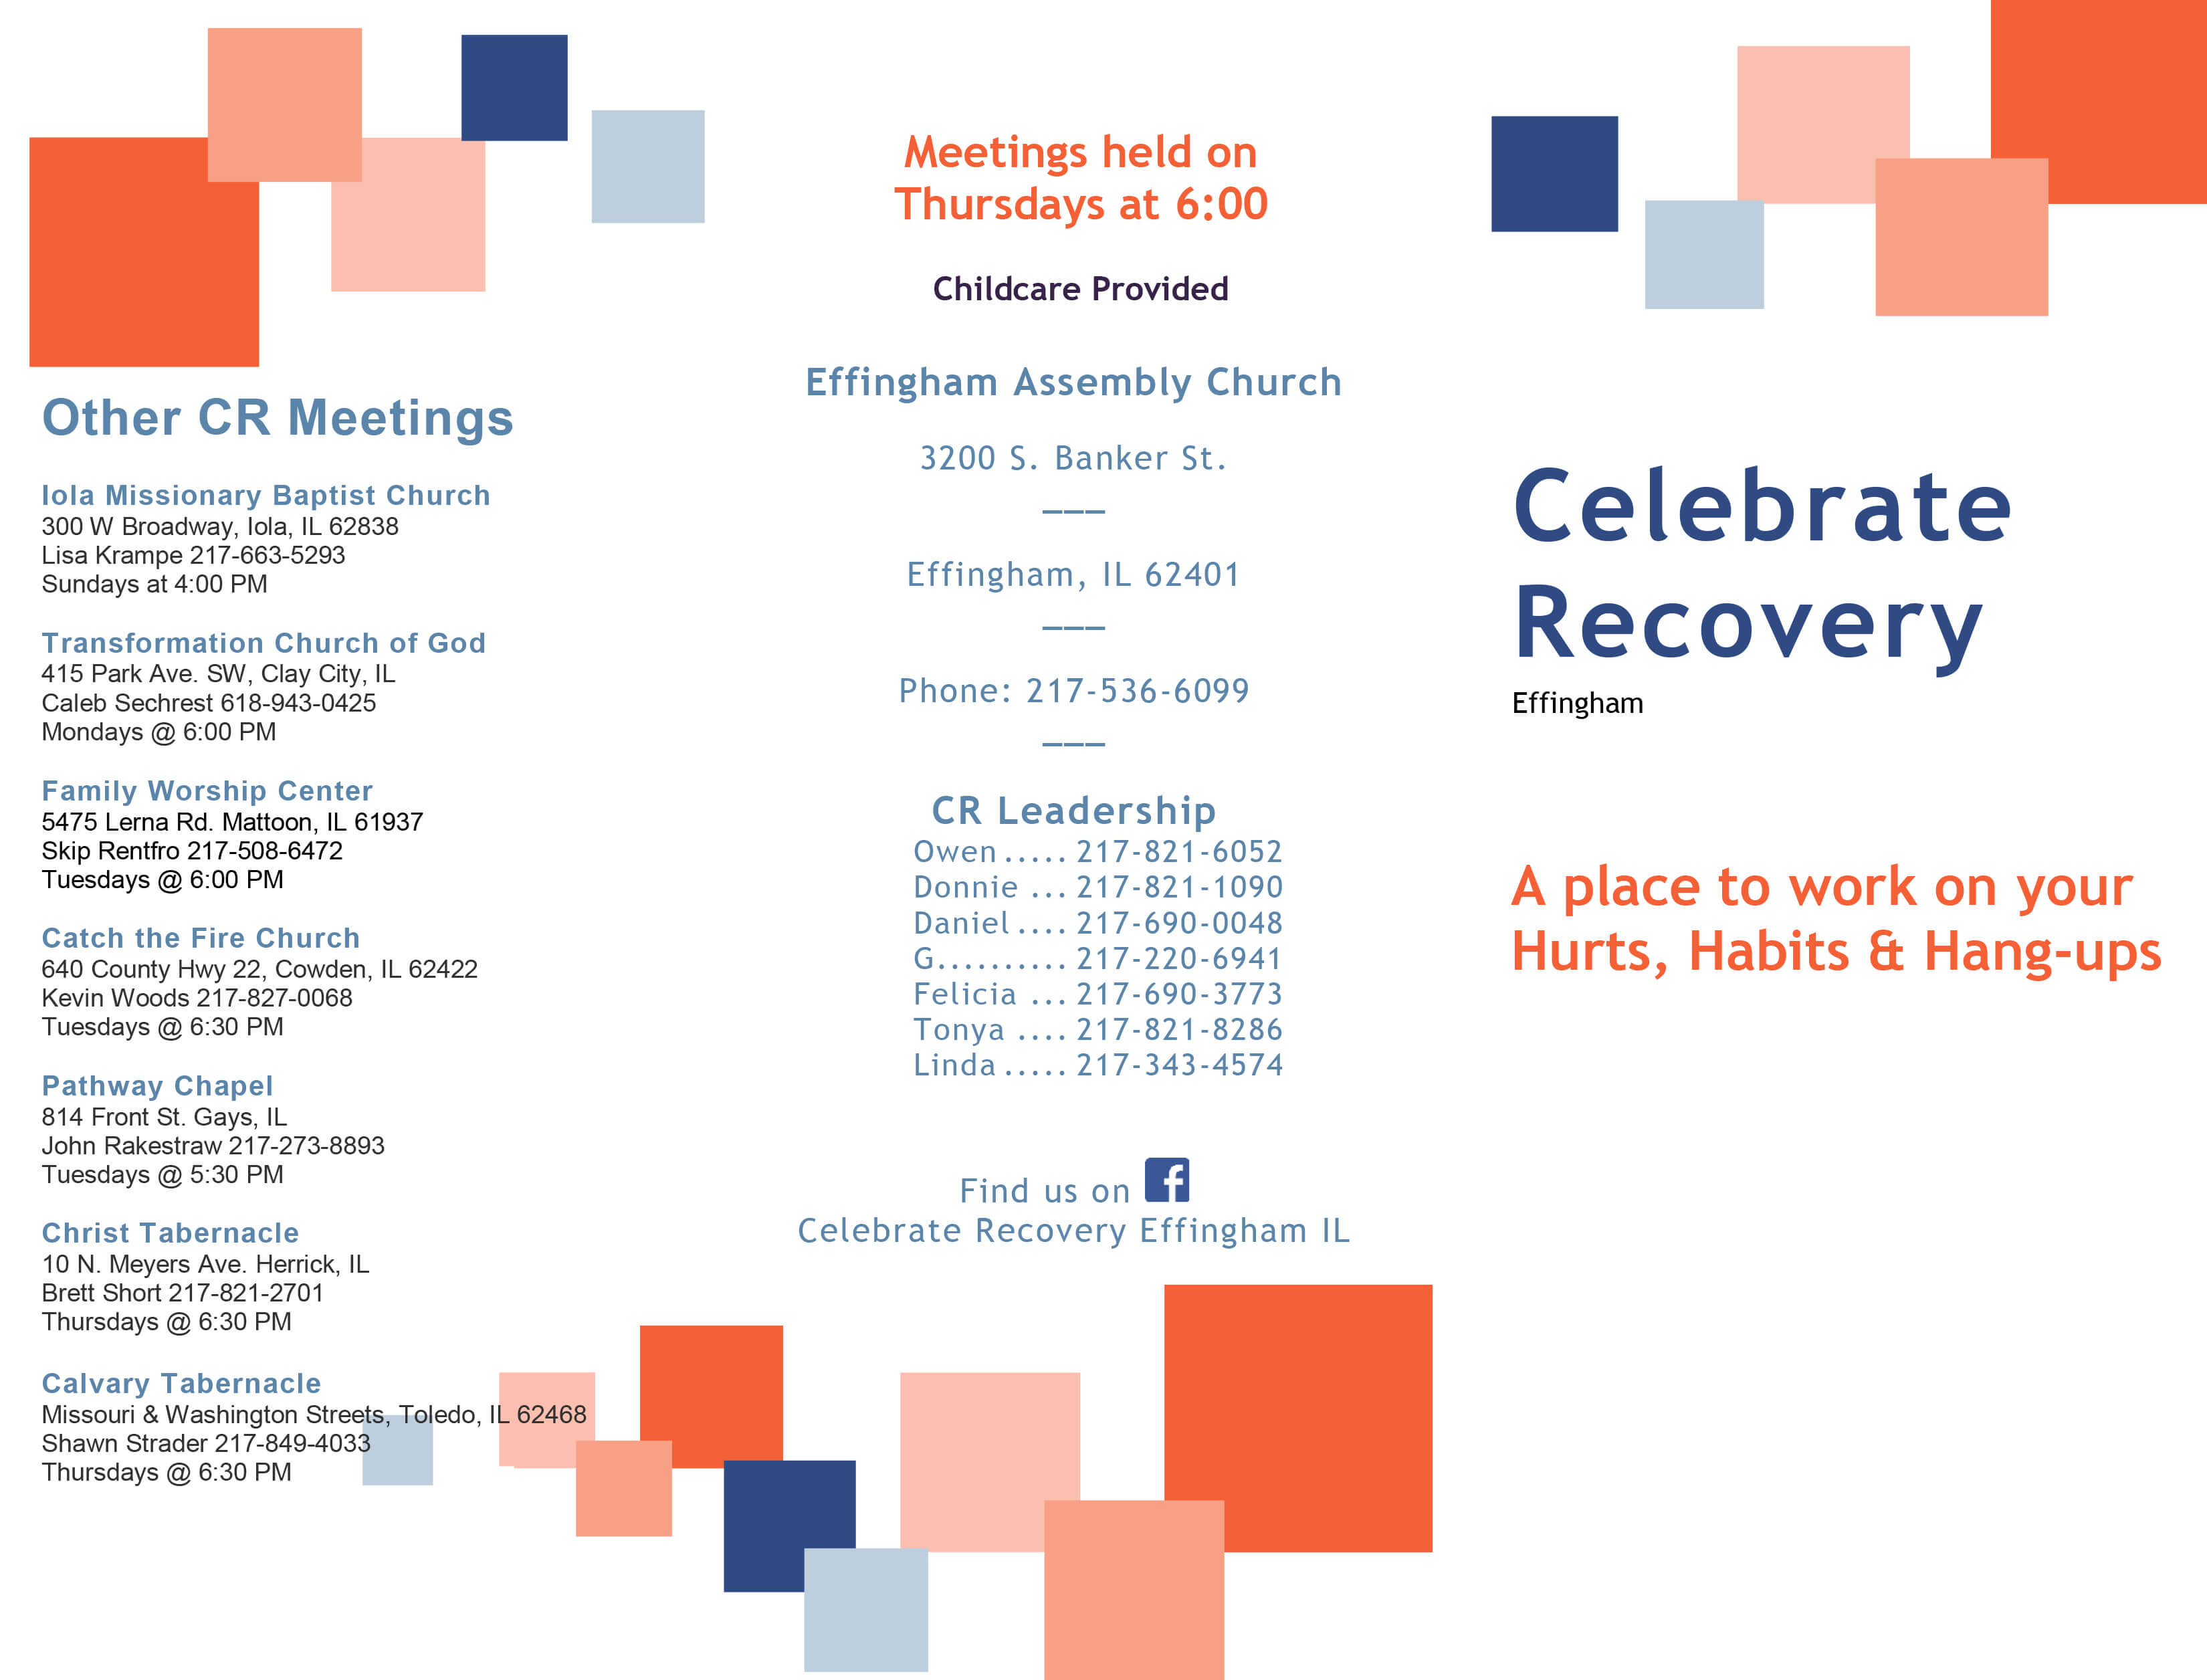 Celebrate Recovery 2019